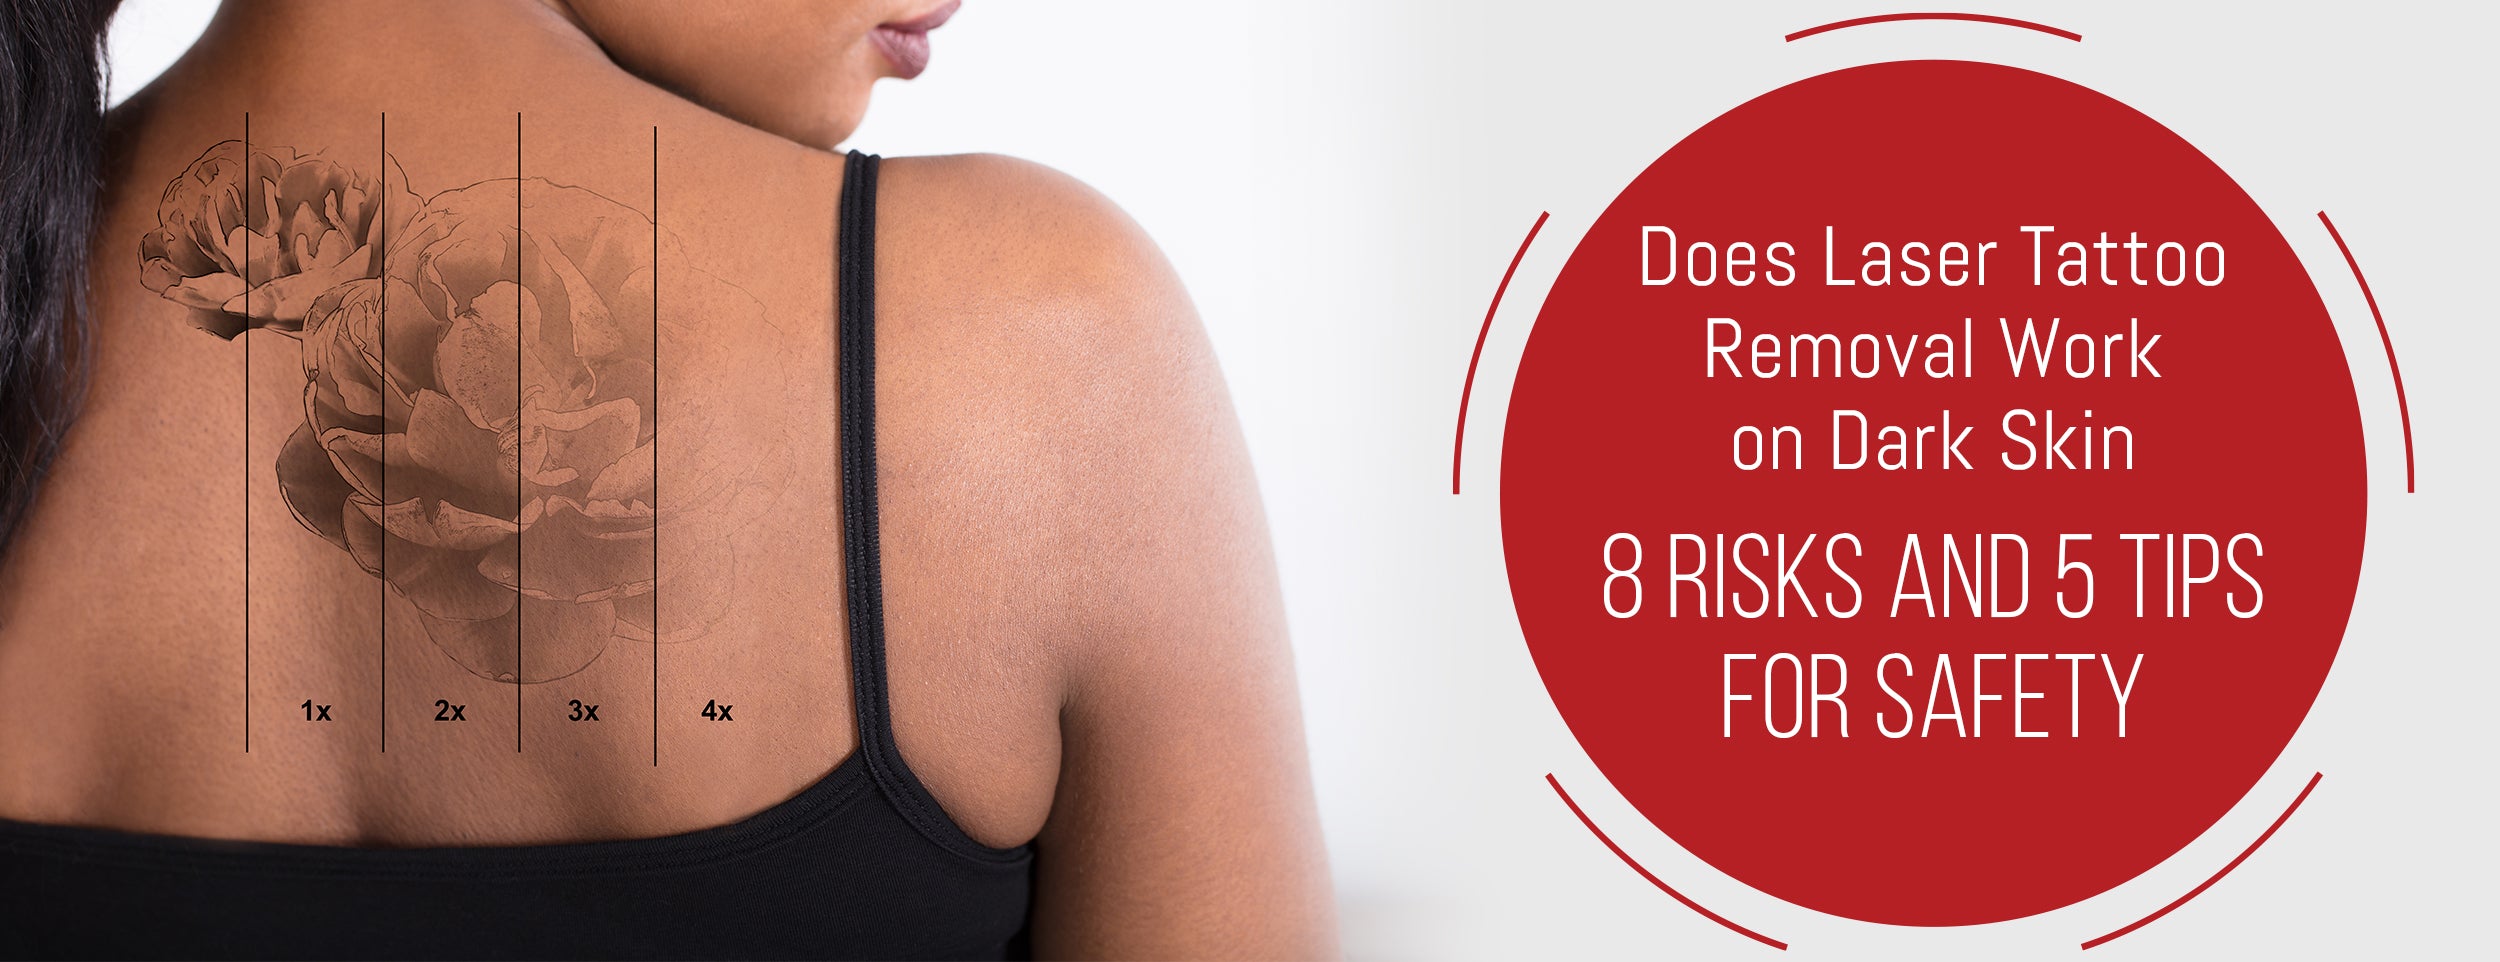 8 Safety Tips for Laser Tattoo Removal on Dark Skin